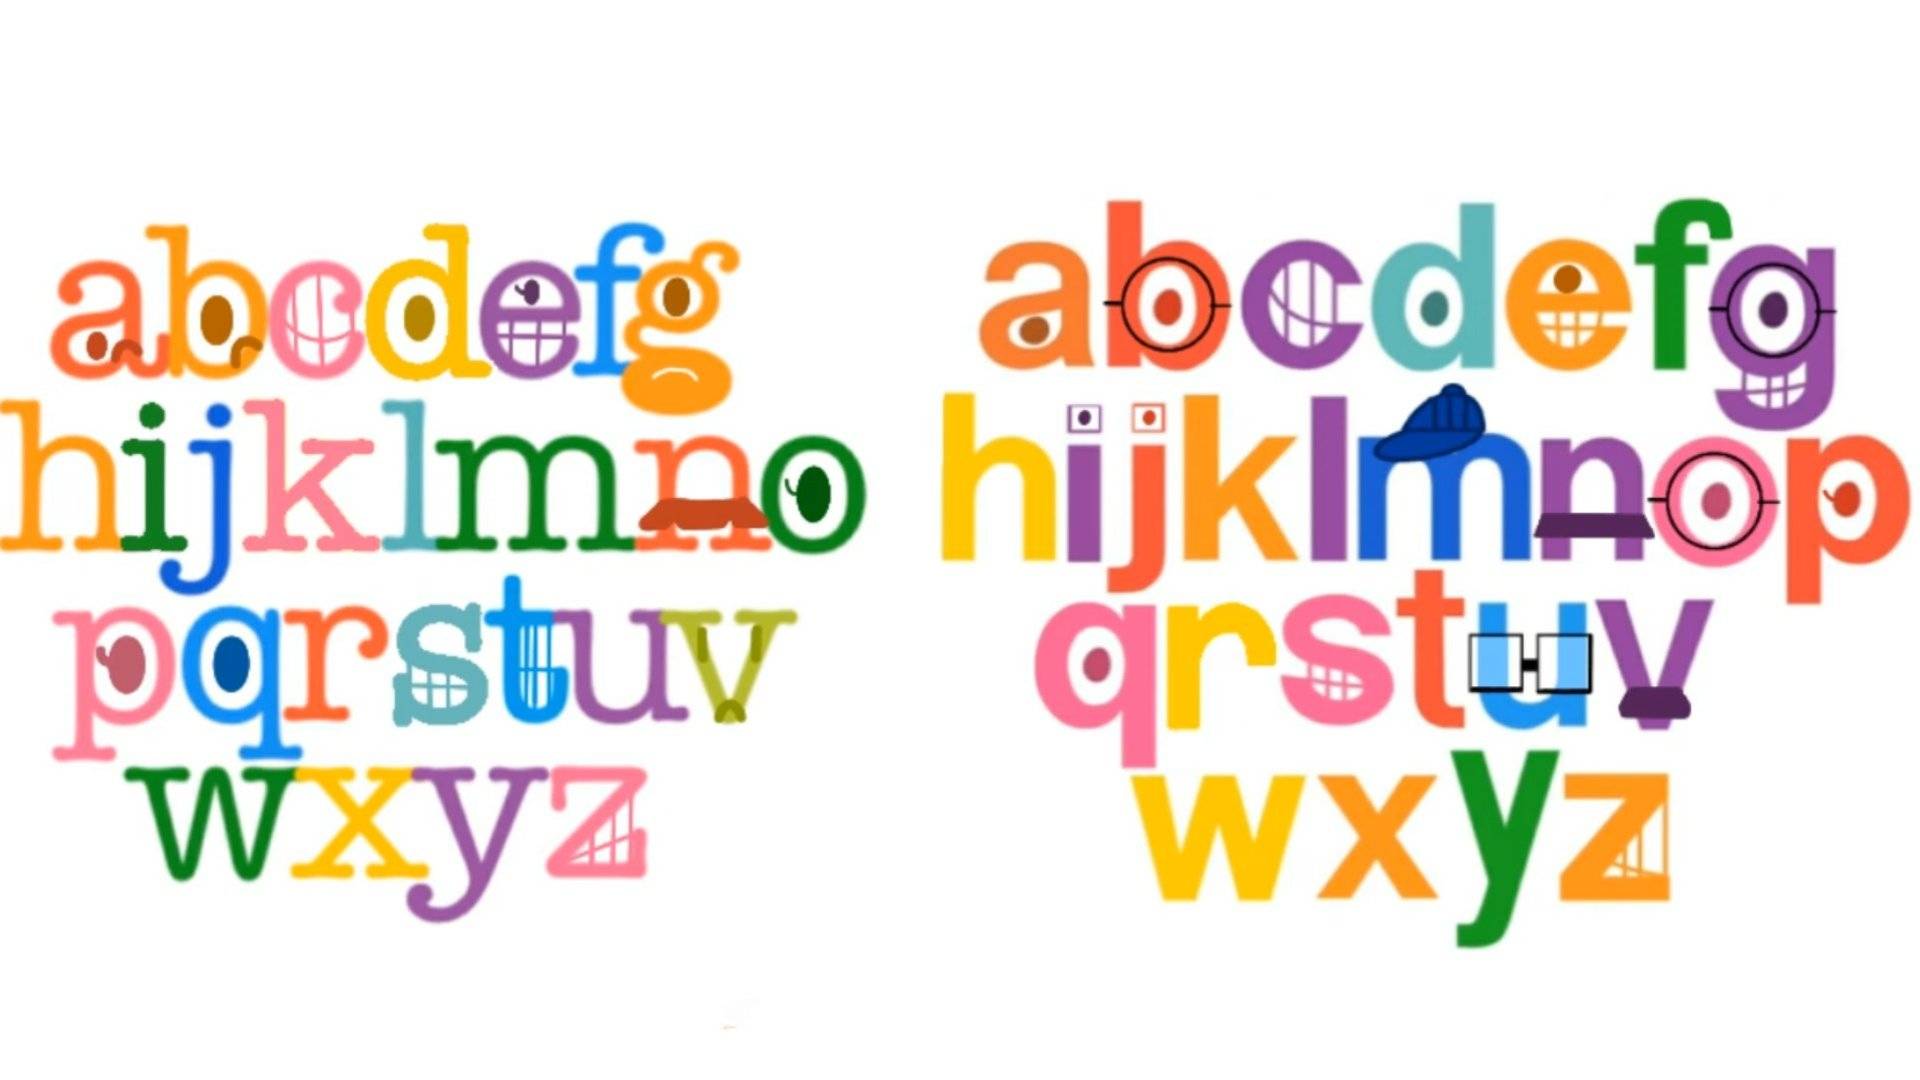 TVO Kids Letters just transform the Many Different Fonts on Vimeo